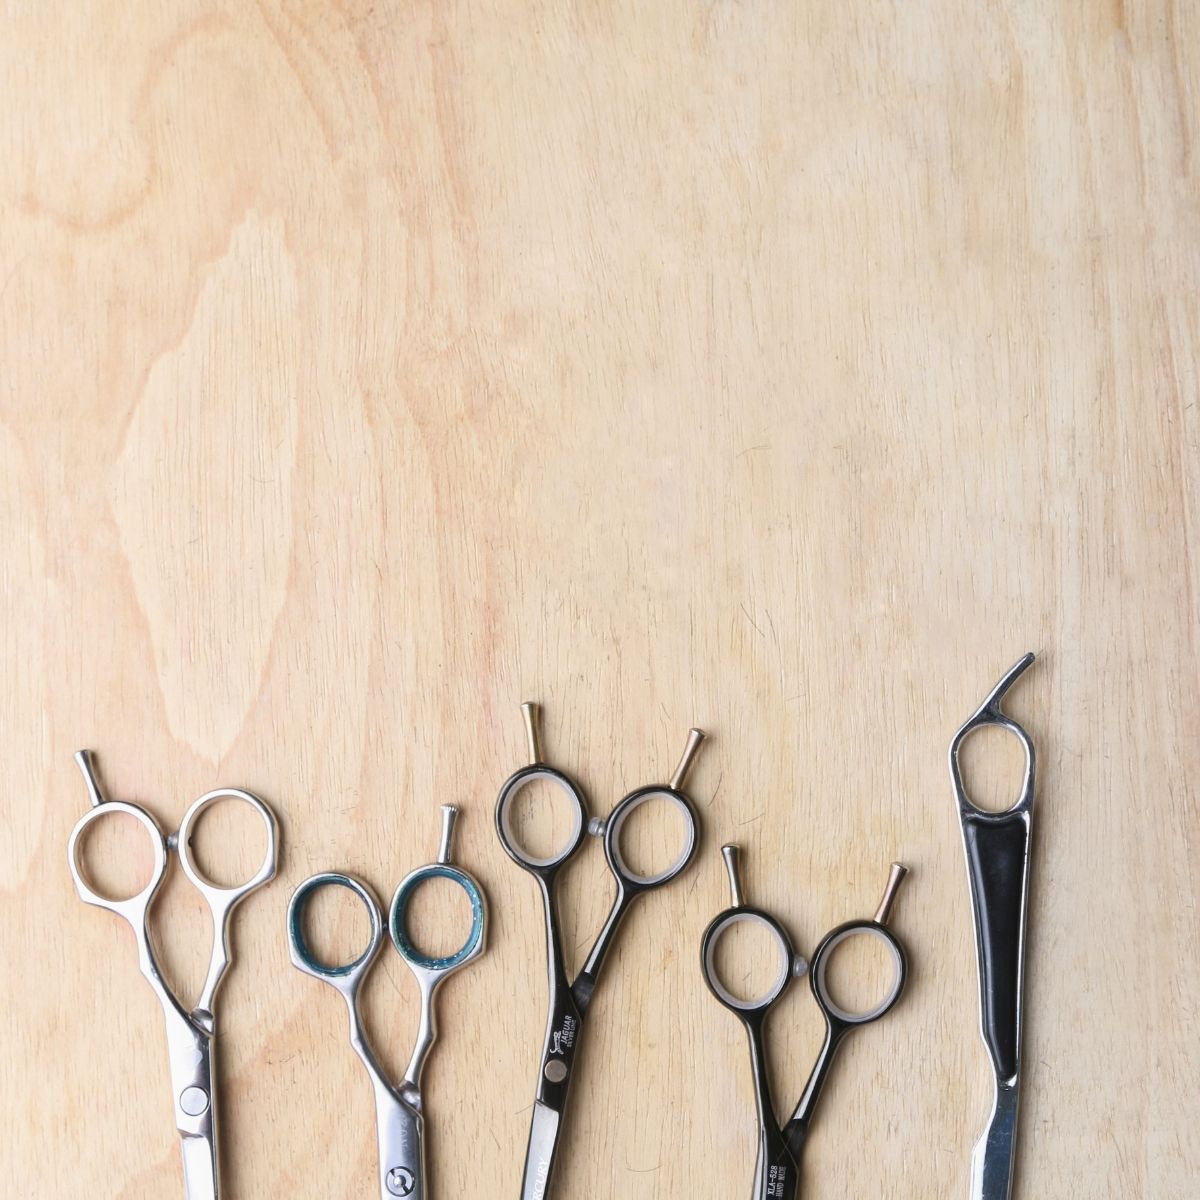 Different American hairdressing shears with hooks (tang) on the handles